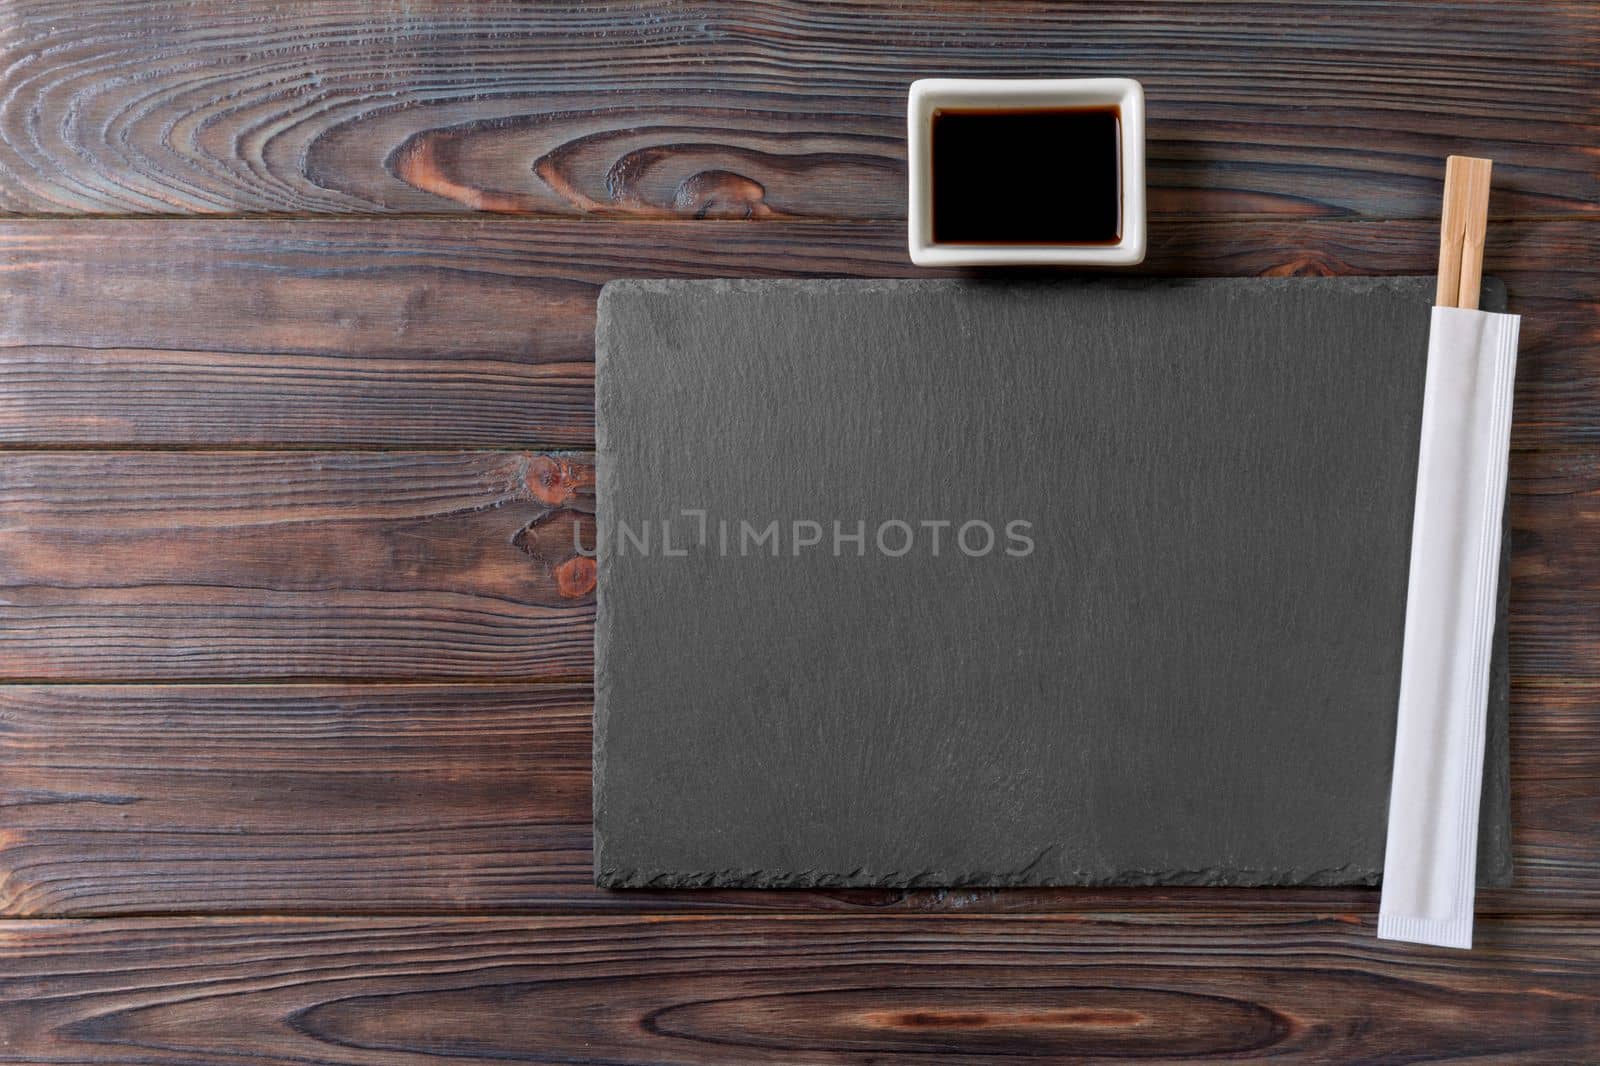 Empty rectangular black slate plate with chopsticks for sushi and soy sauce on wooden background. Top view with copy space.